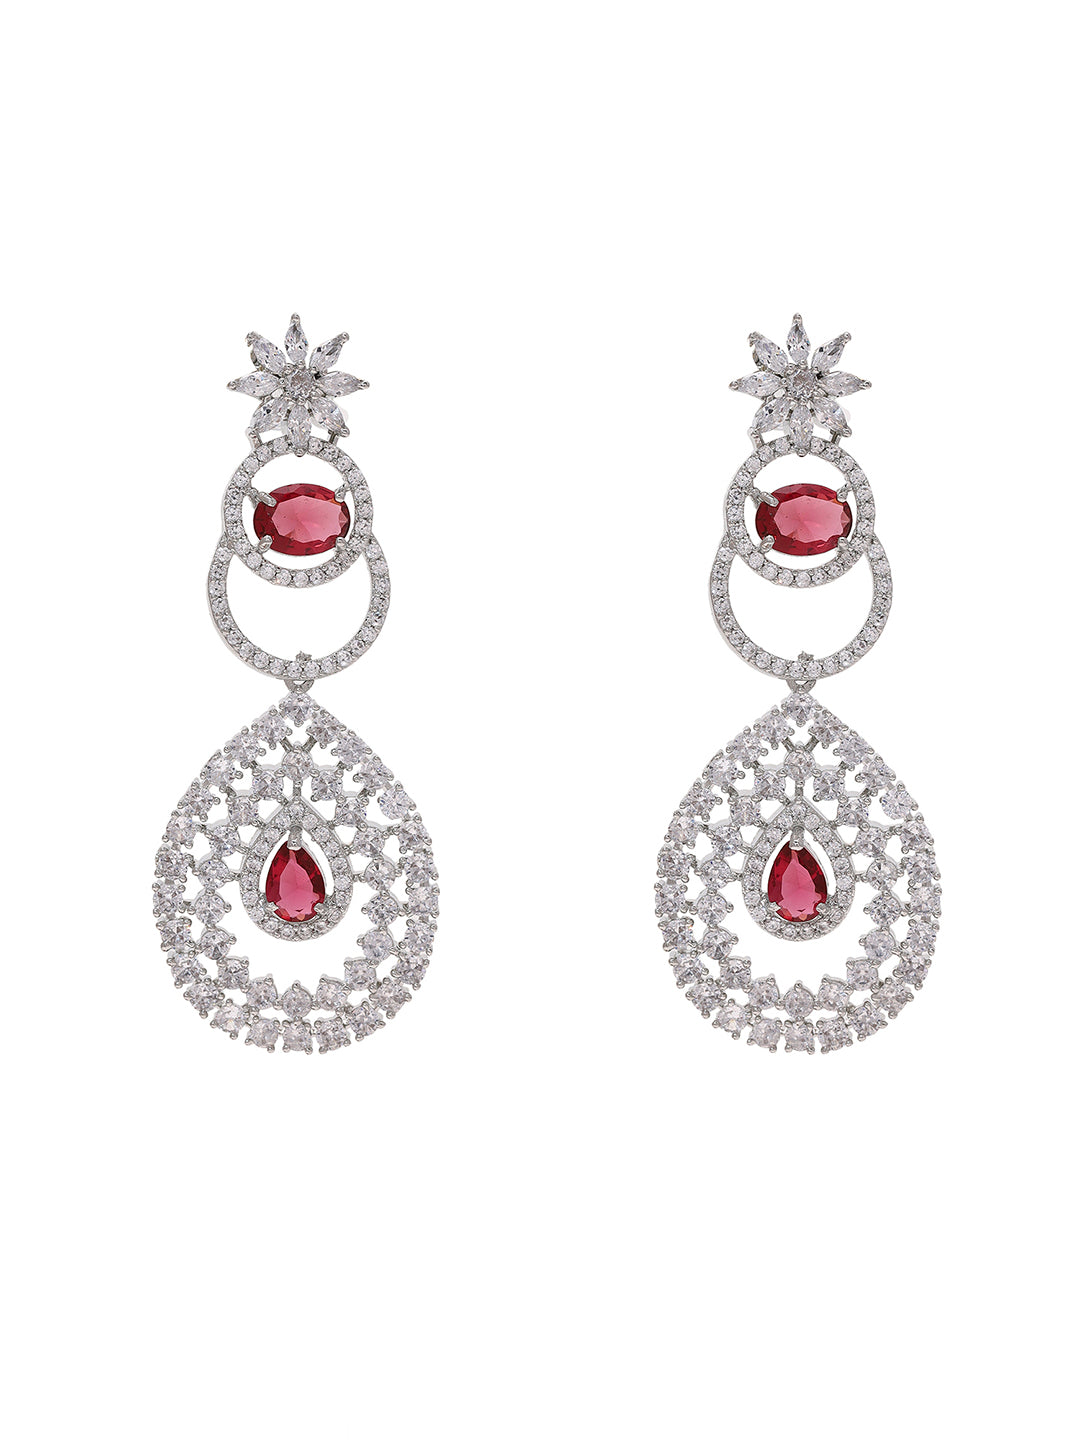 Priyaasi Silver-Plated American Diamond and Ruby Stones Earrings Style